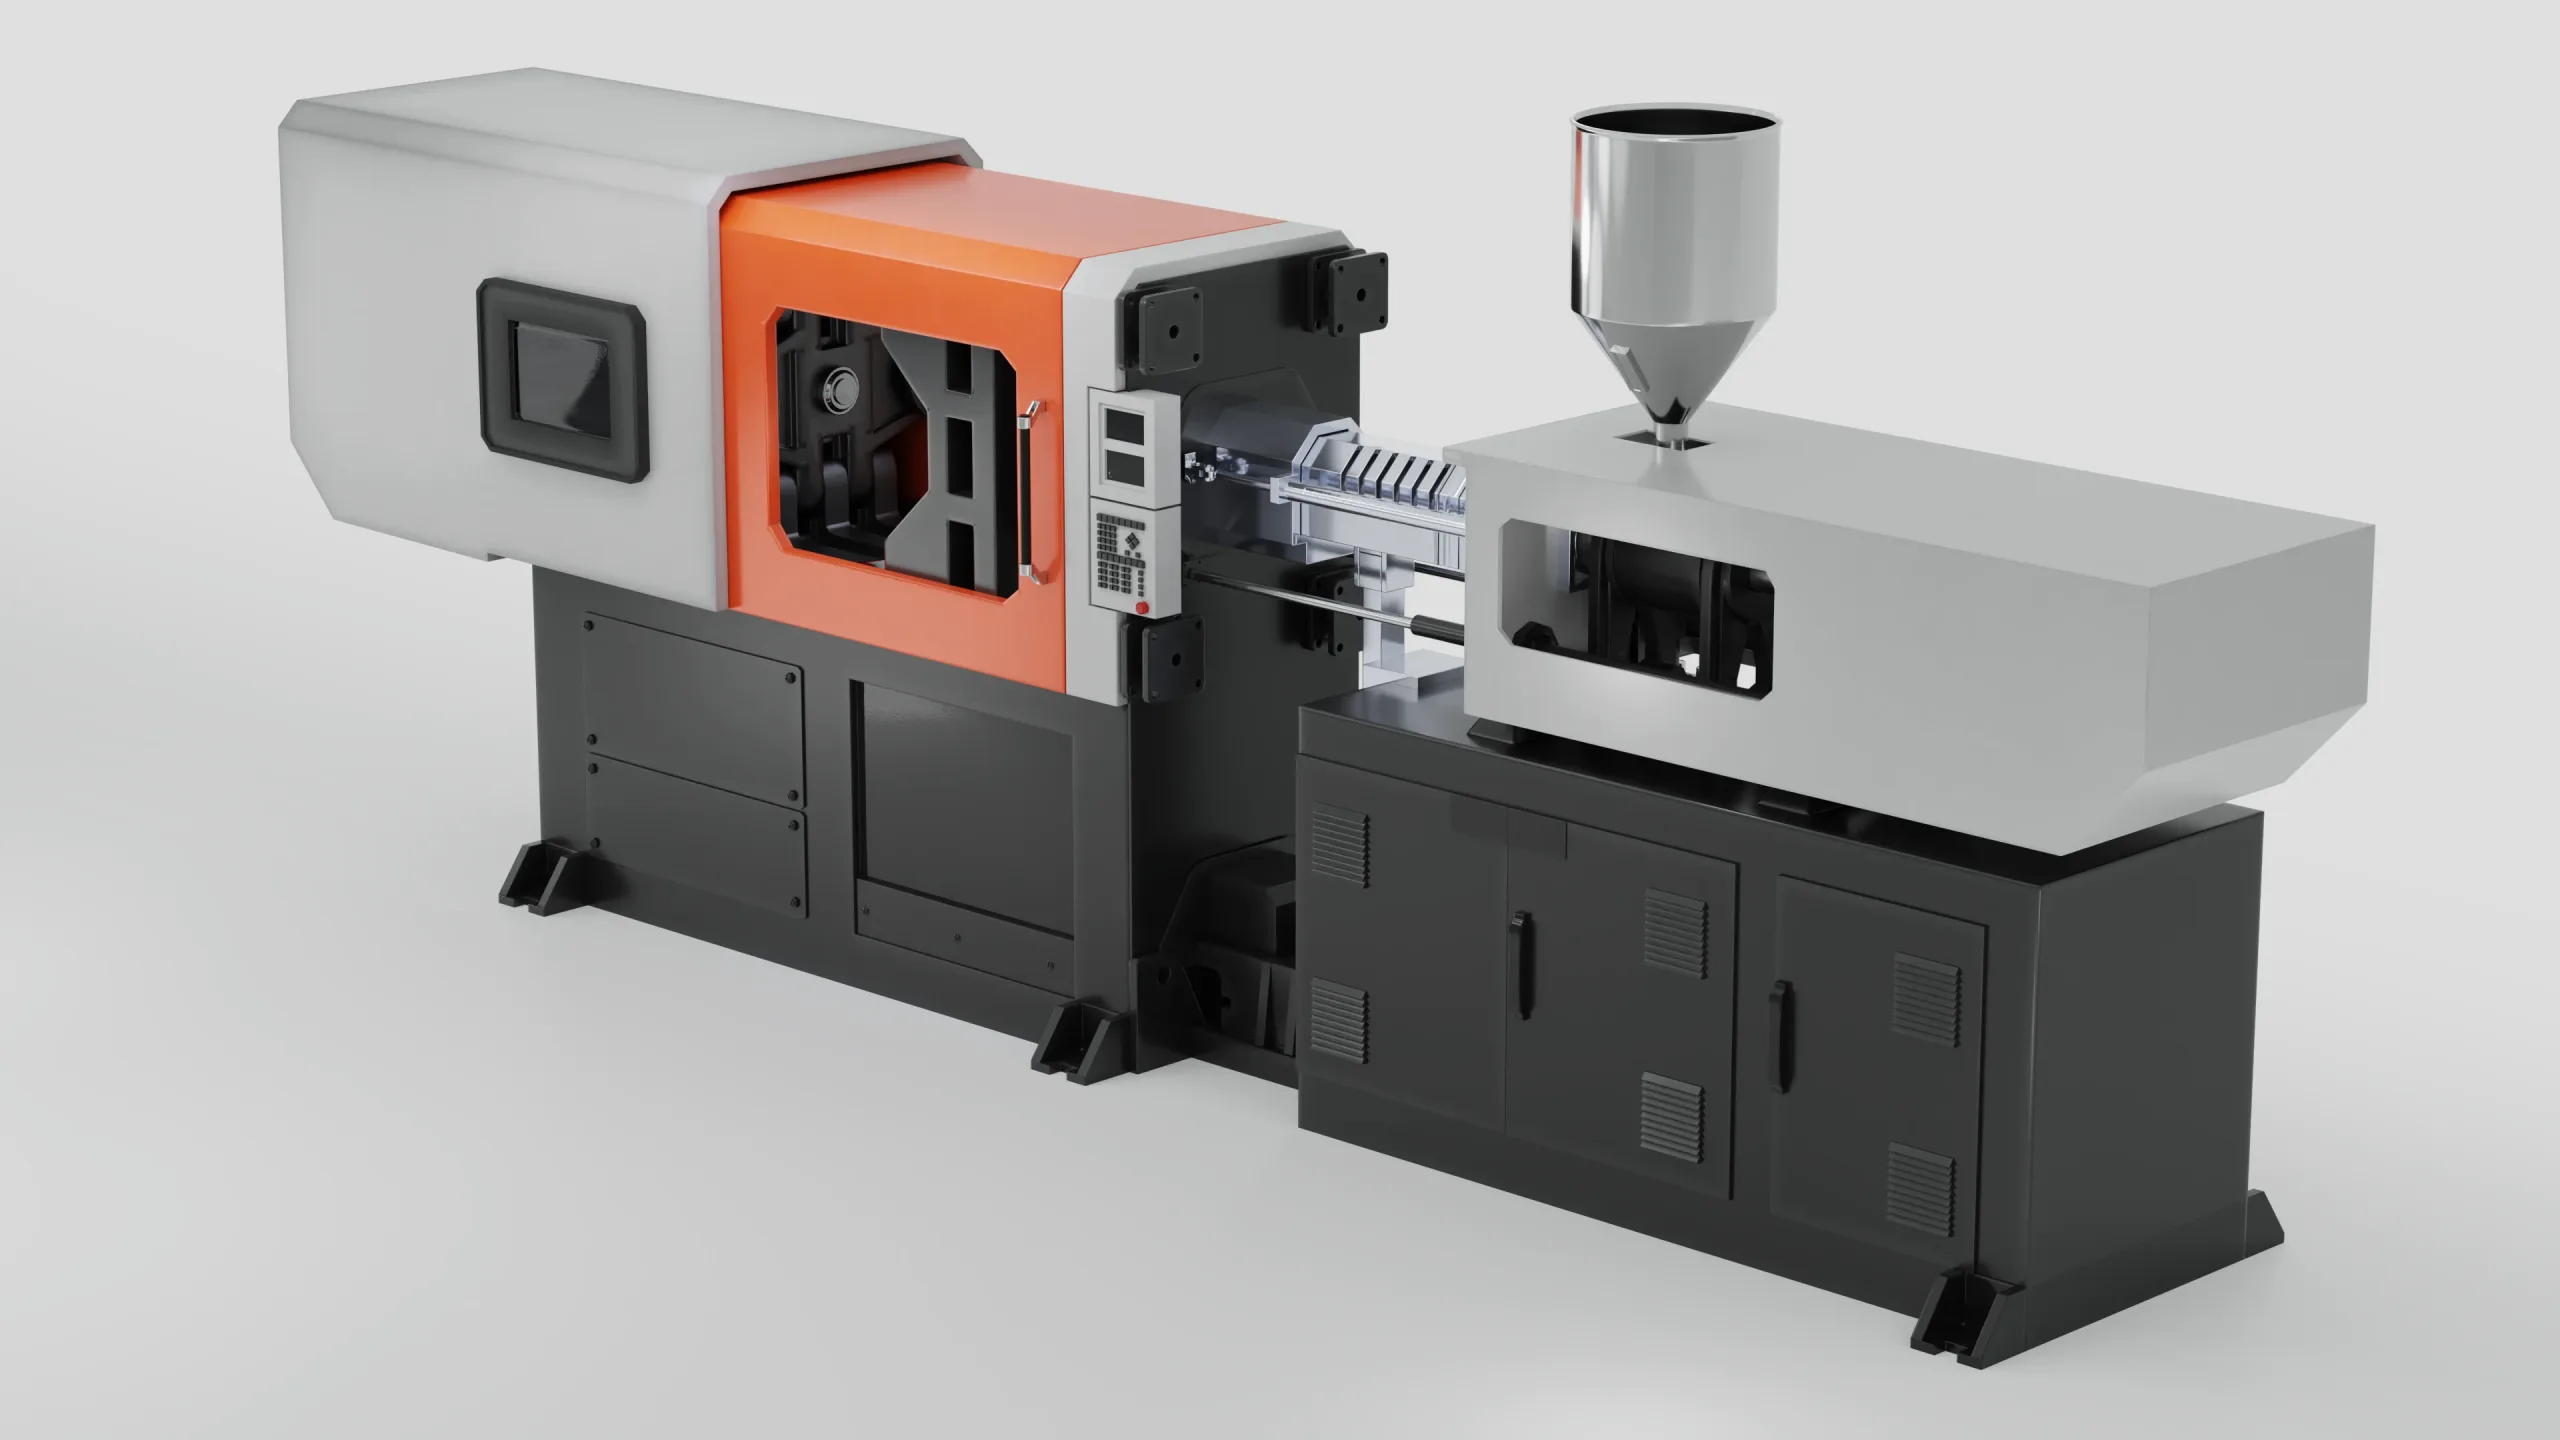 CNC Plastic Injection Molding Machine ready for animation